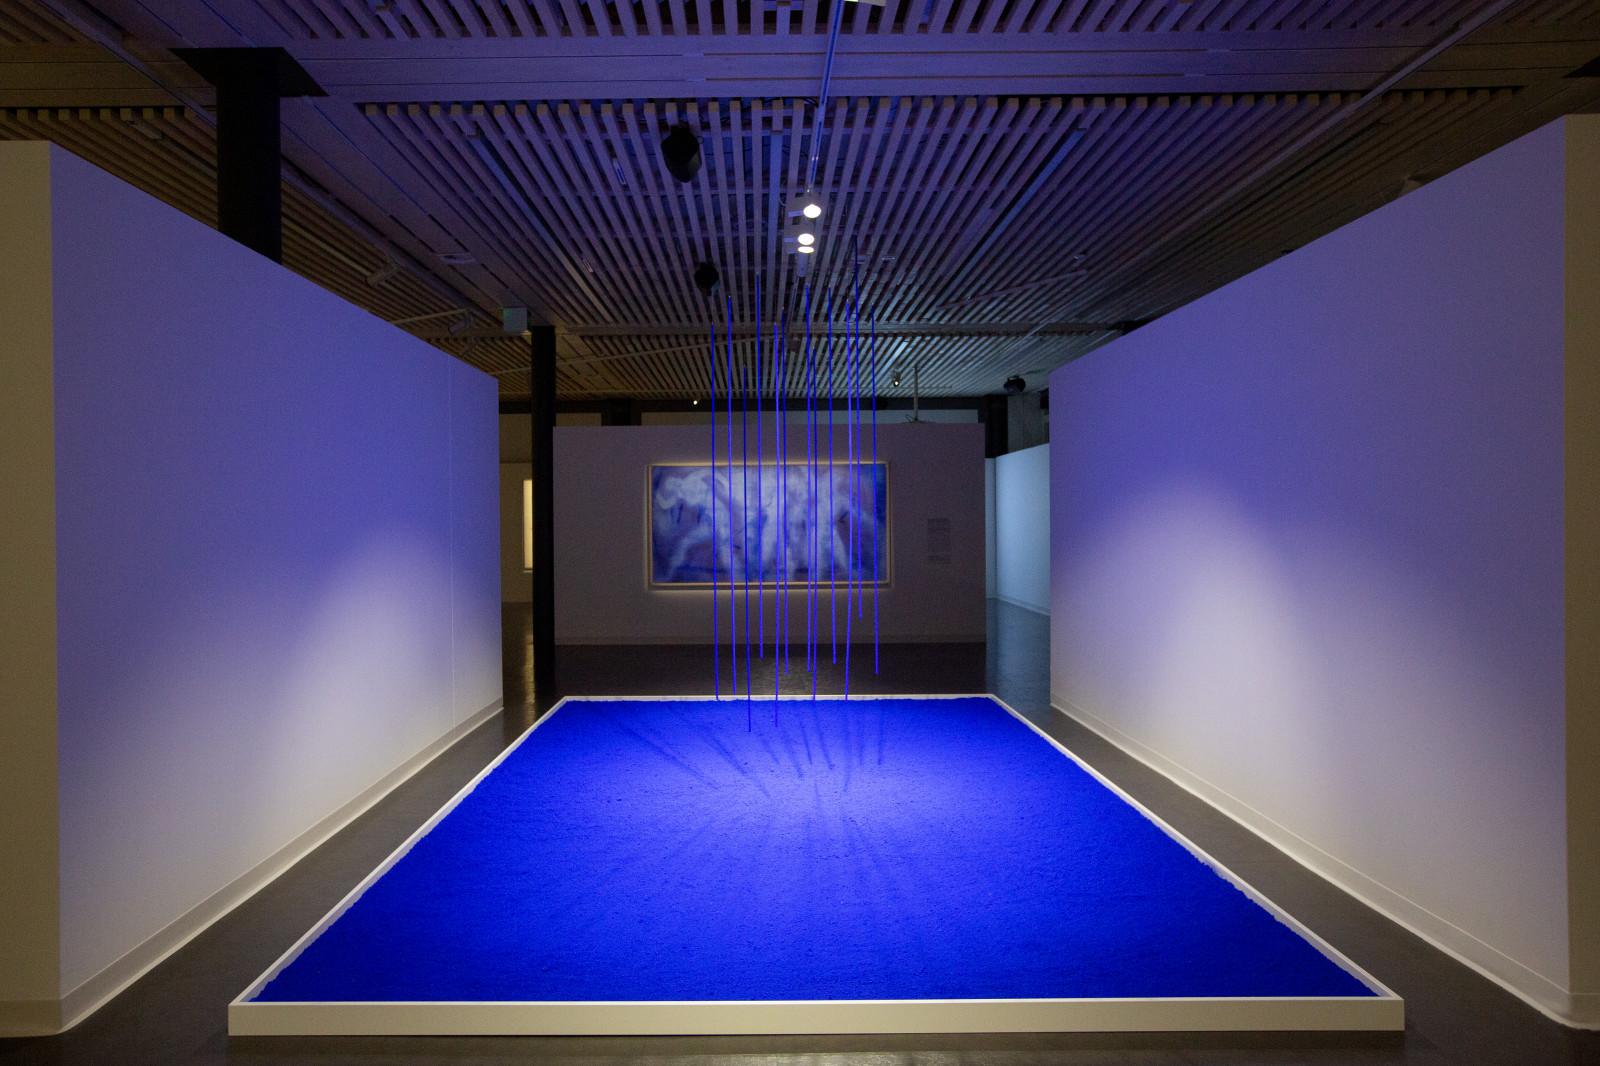 View of the exhibition "Yves Klein - Dreaming in the dream of others", Fondation Opale, Lens, Switzerland, 2022